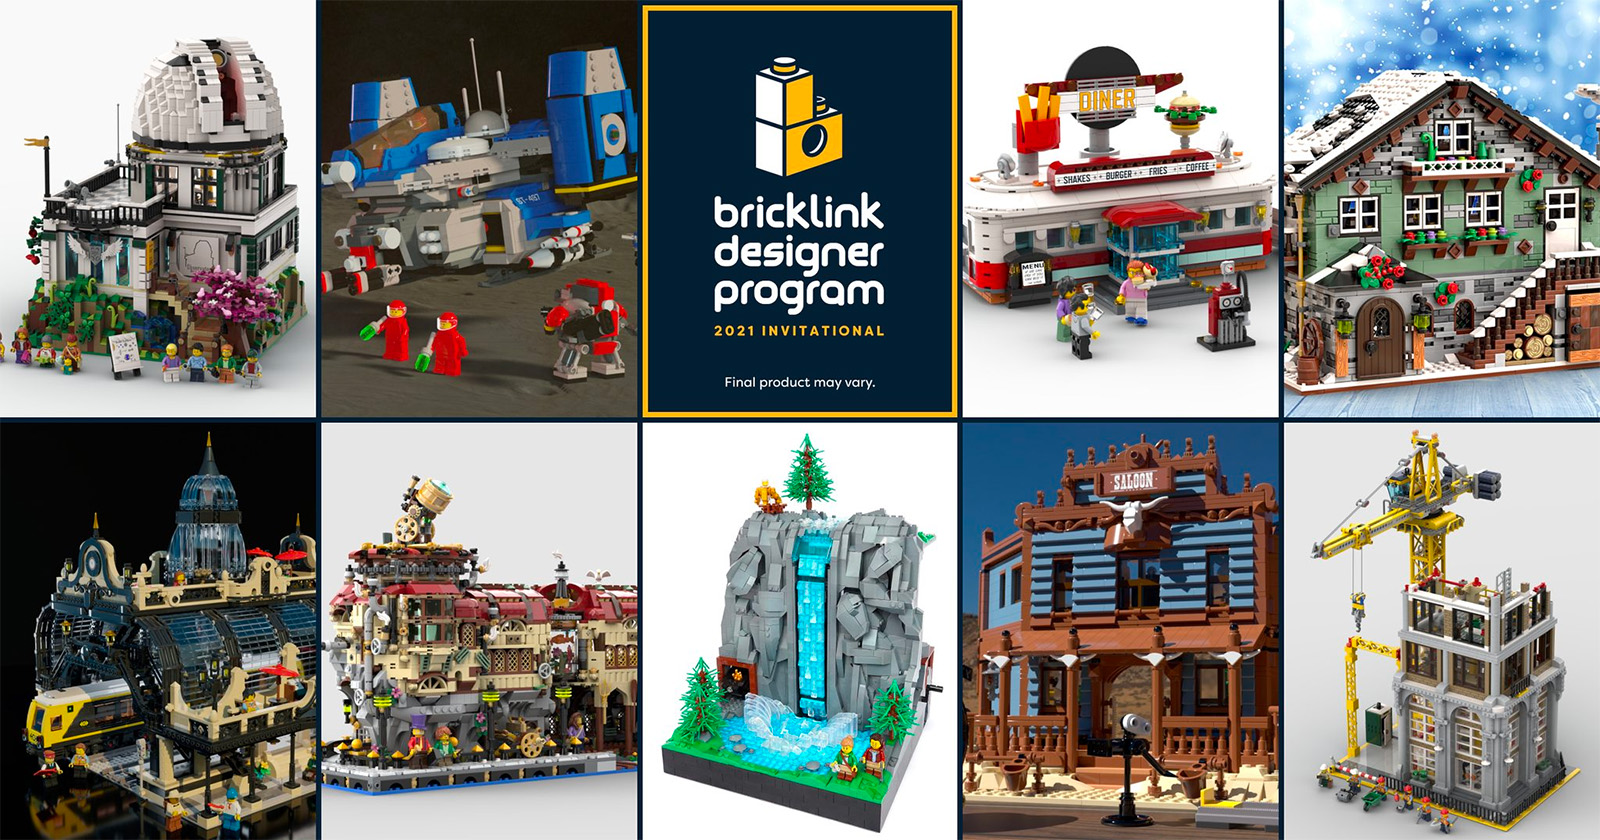 Bricklink Designer Program: pre-orders for the third wave of crowdfunding are open